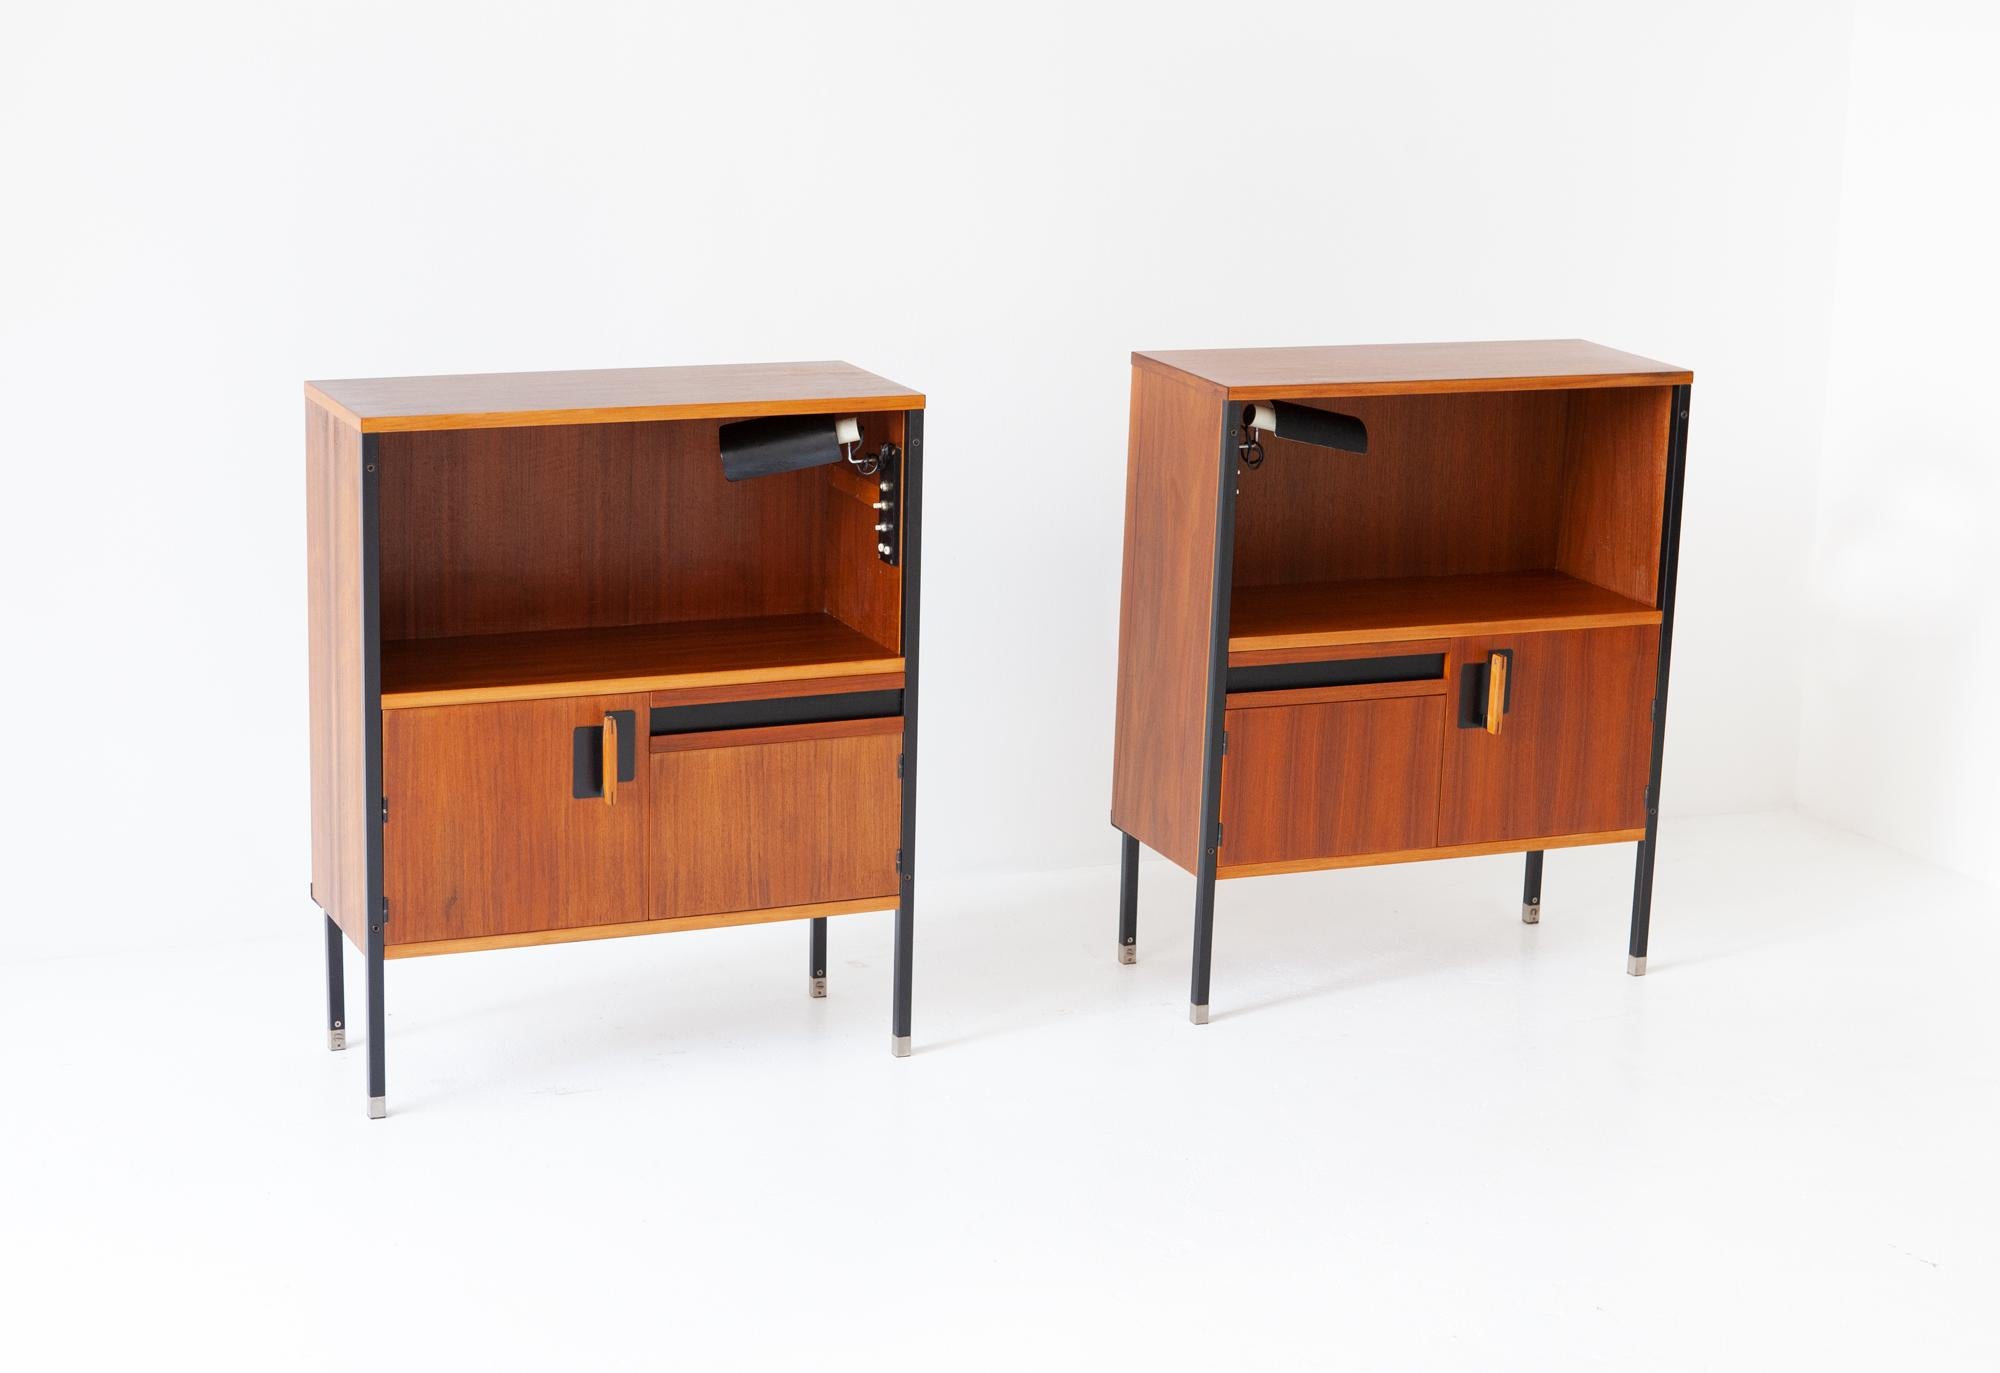 Mid-Century Modern Restored Nightstands by Ico Parisi for MIM with Gino Sarfatti Lamps, 1958